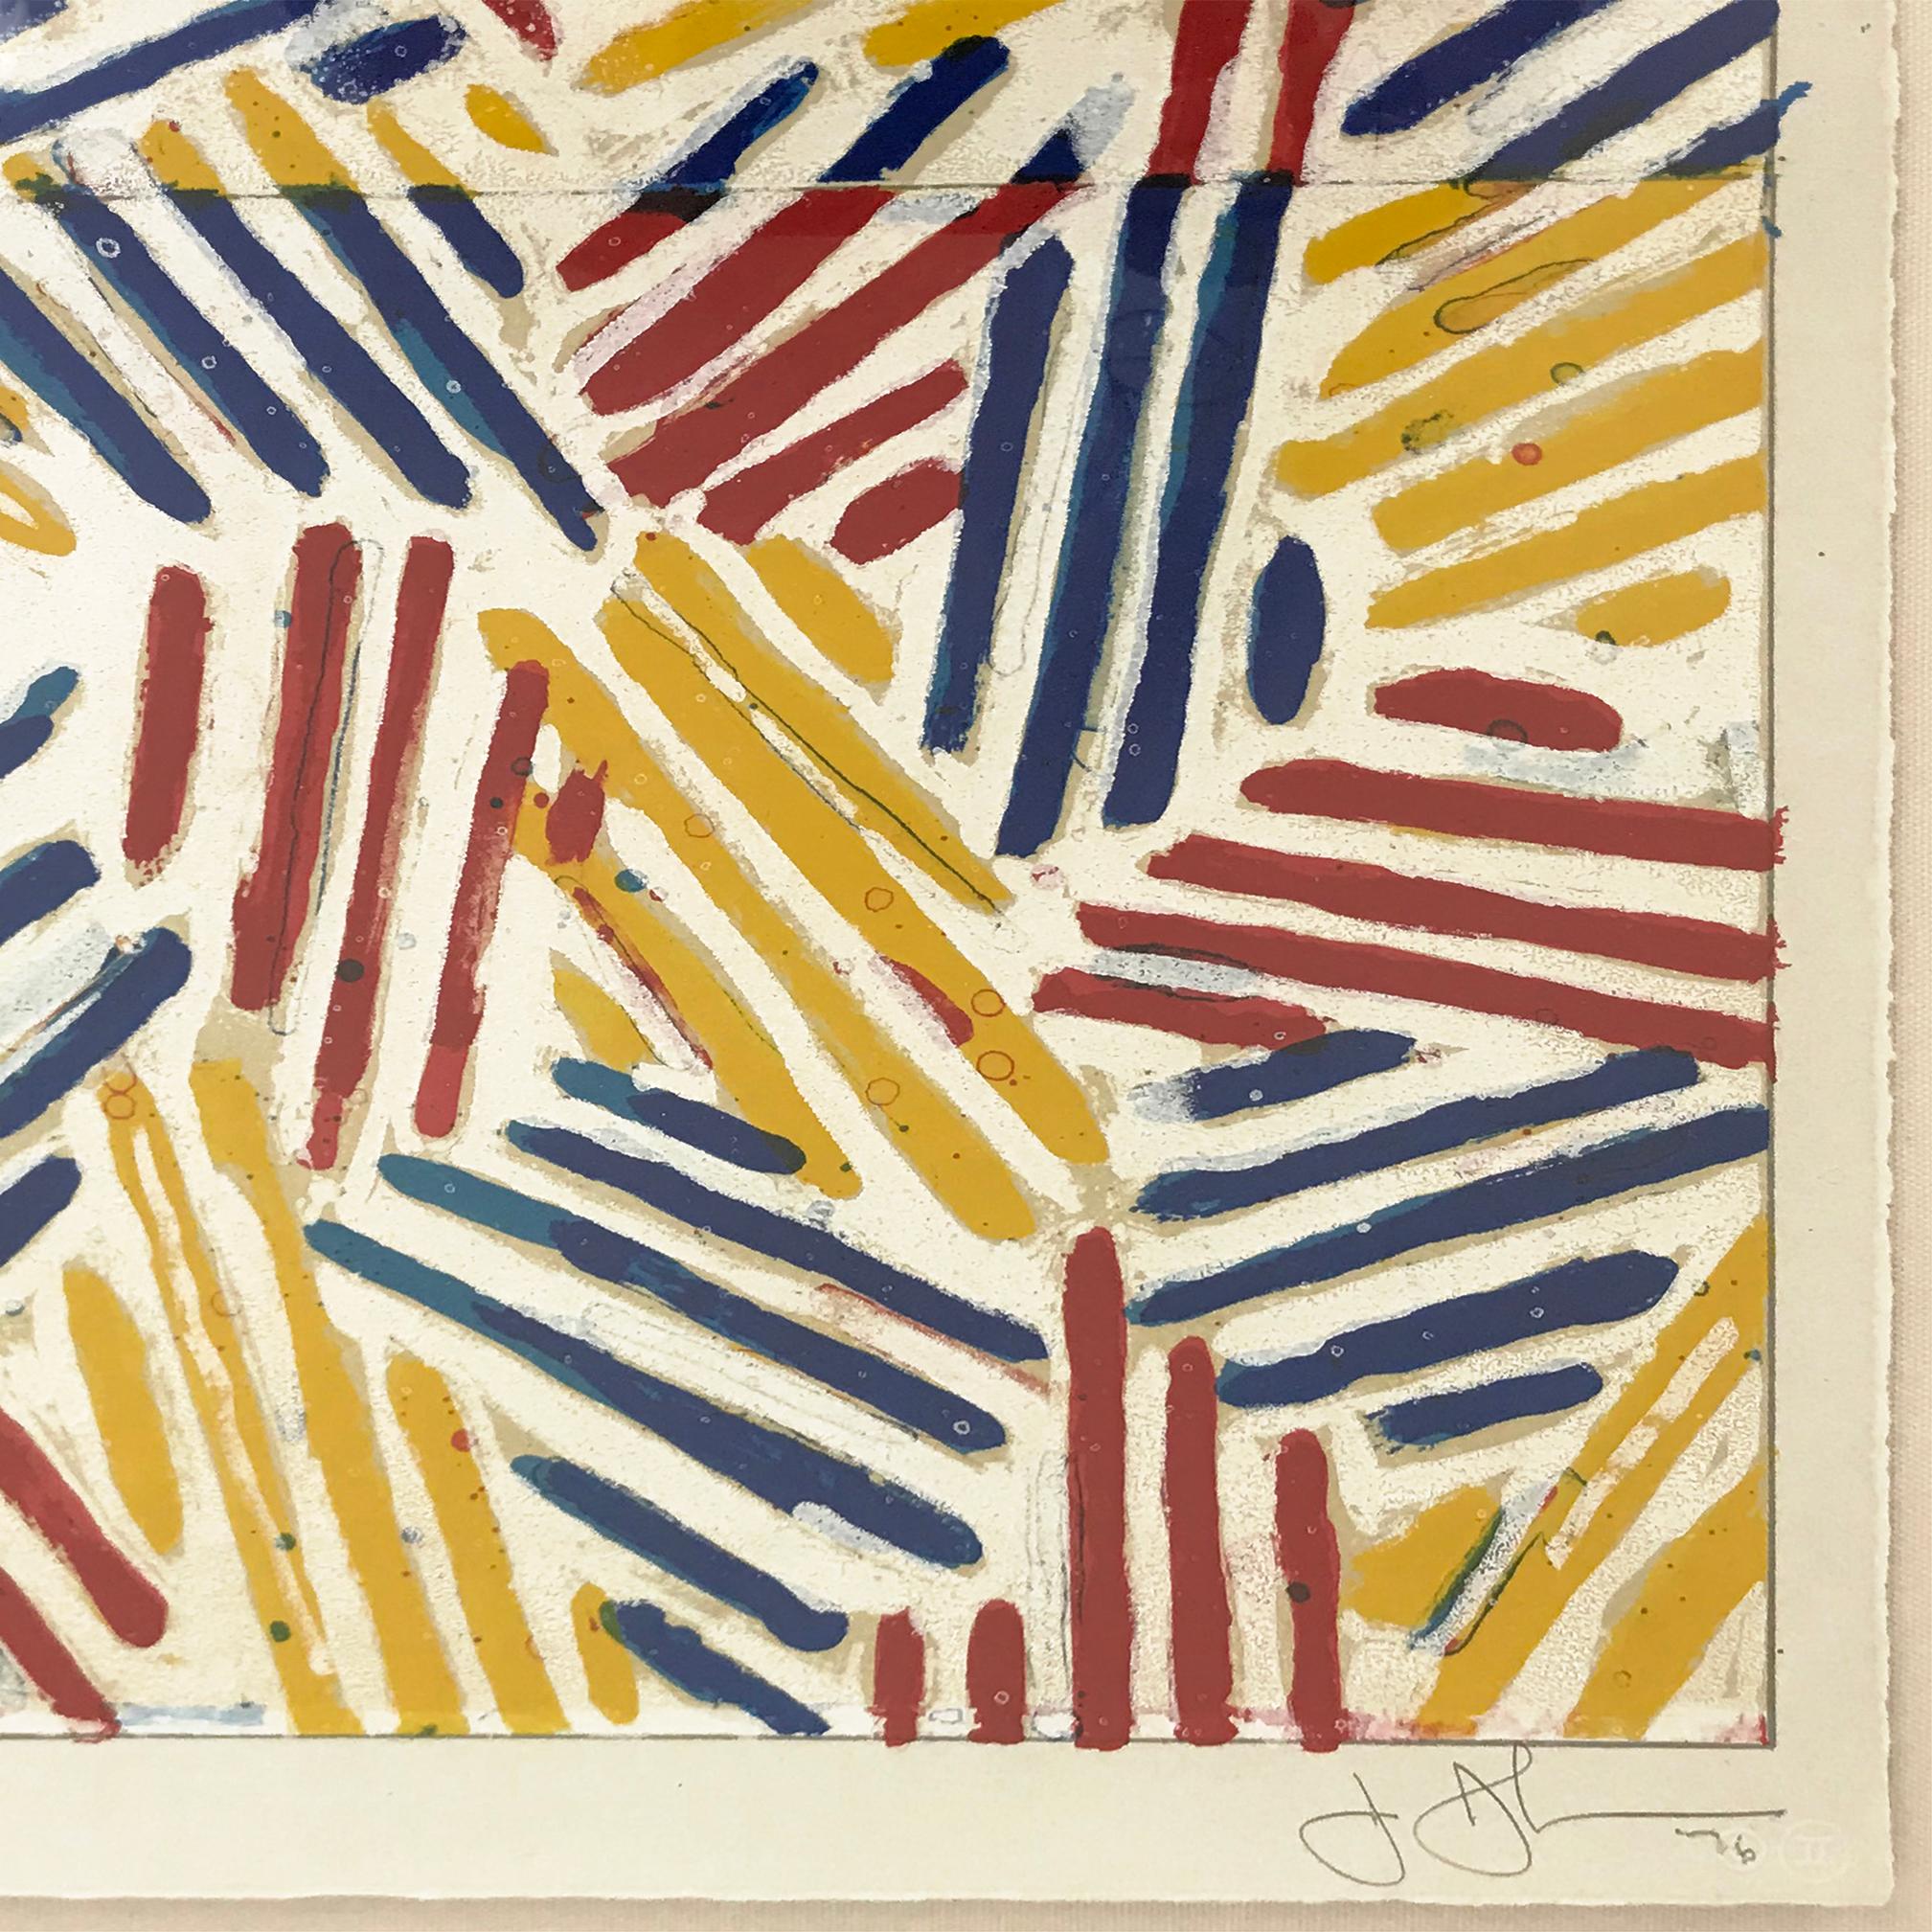 #4, FROM 6 LITHOGRAPHS (AFTER UNTITLED 1975) - Painting by Jasper Johns